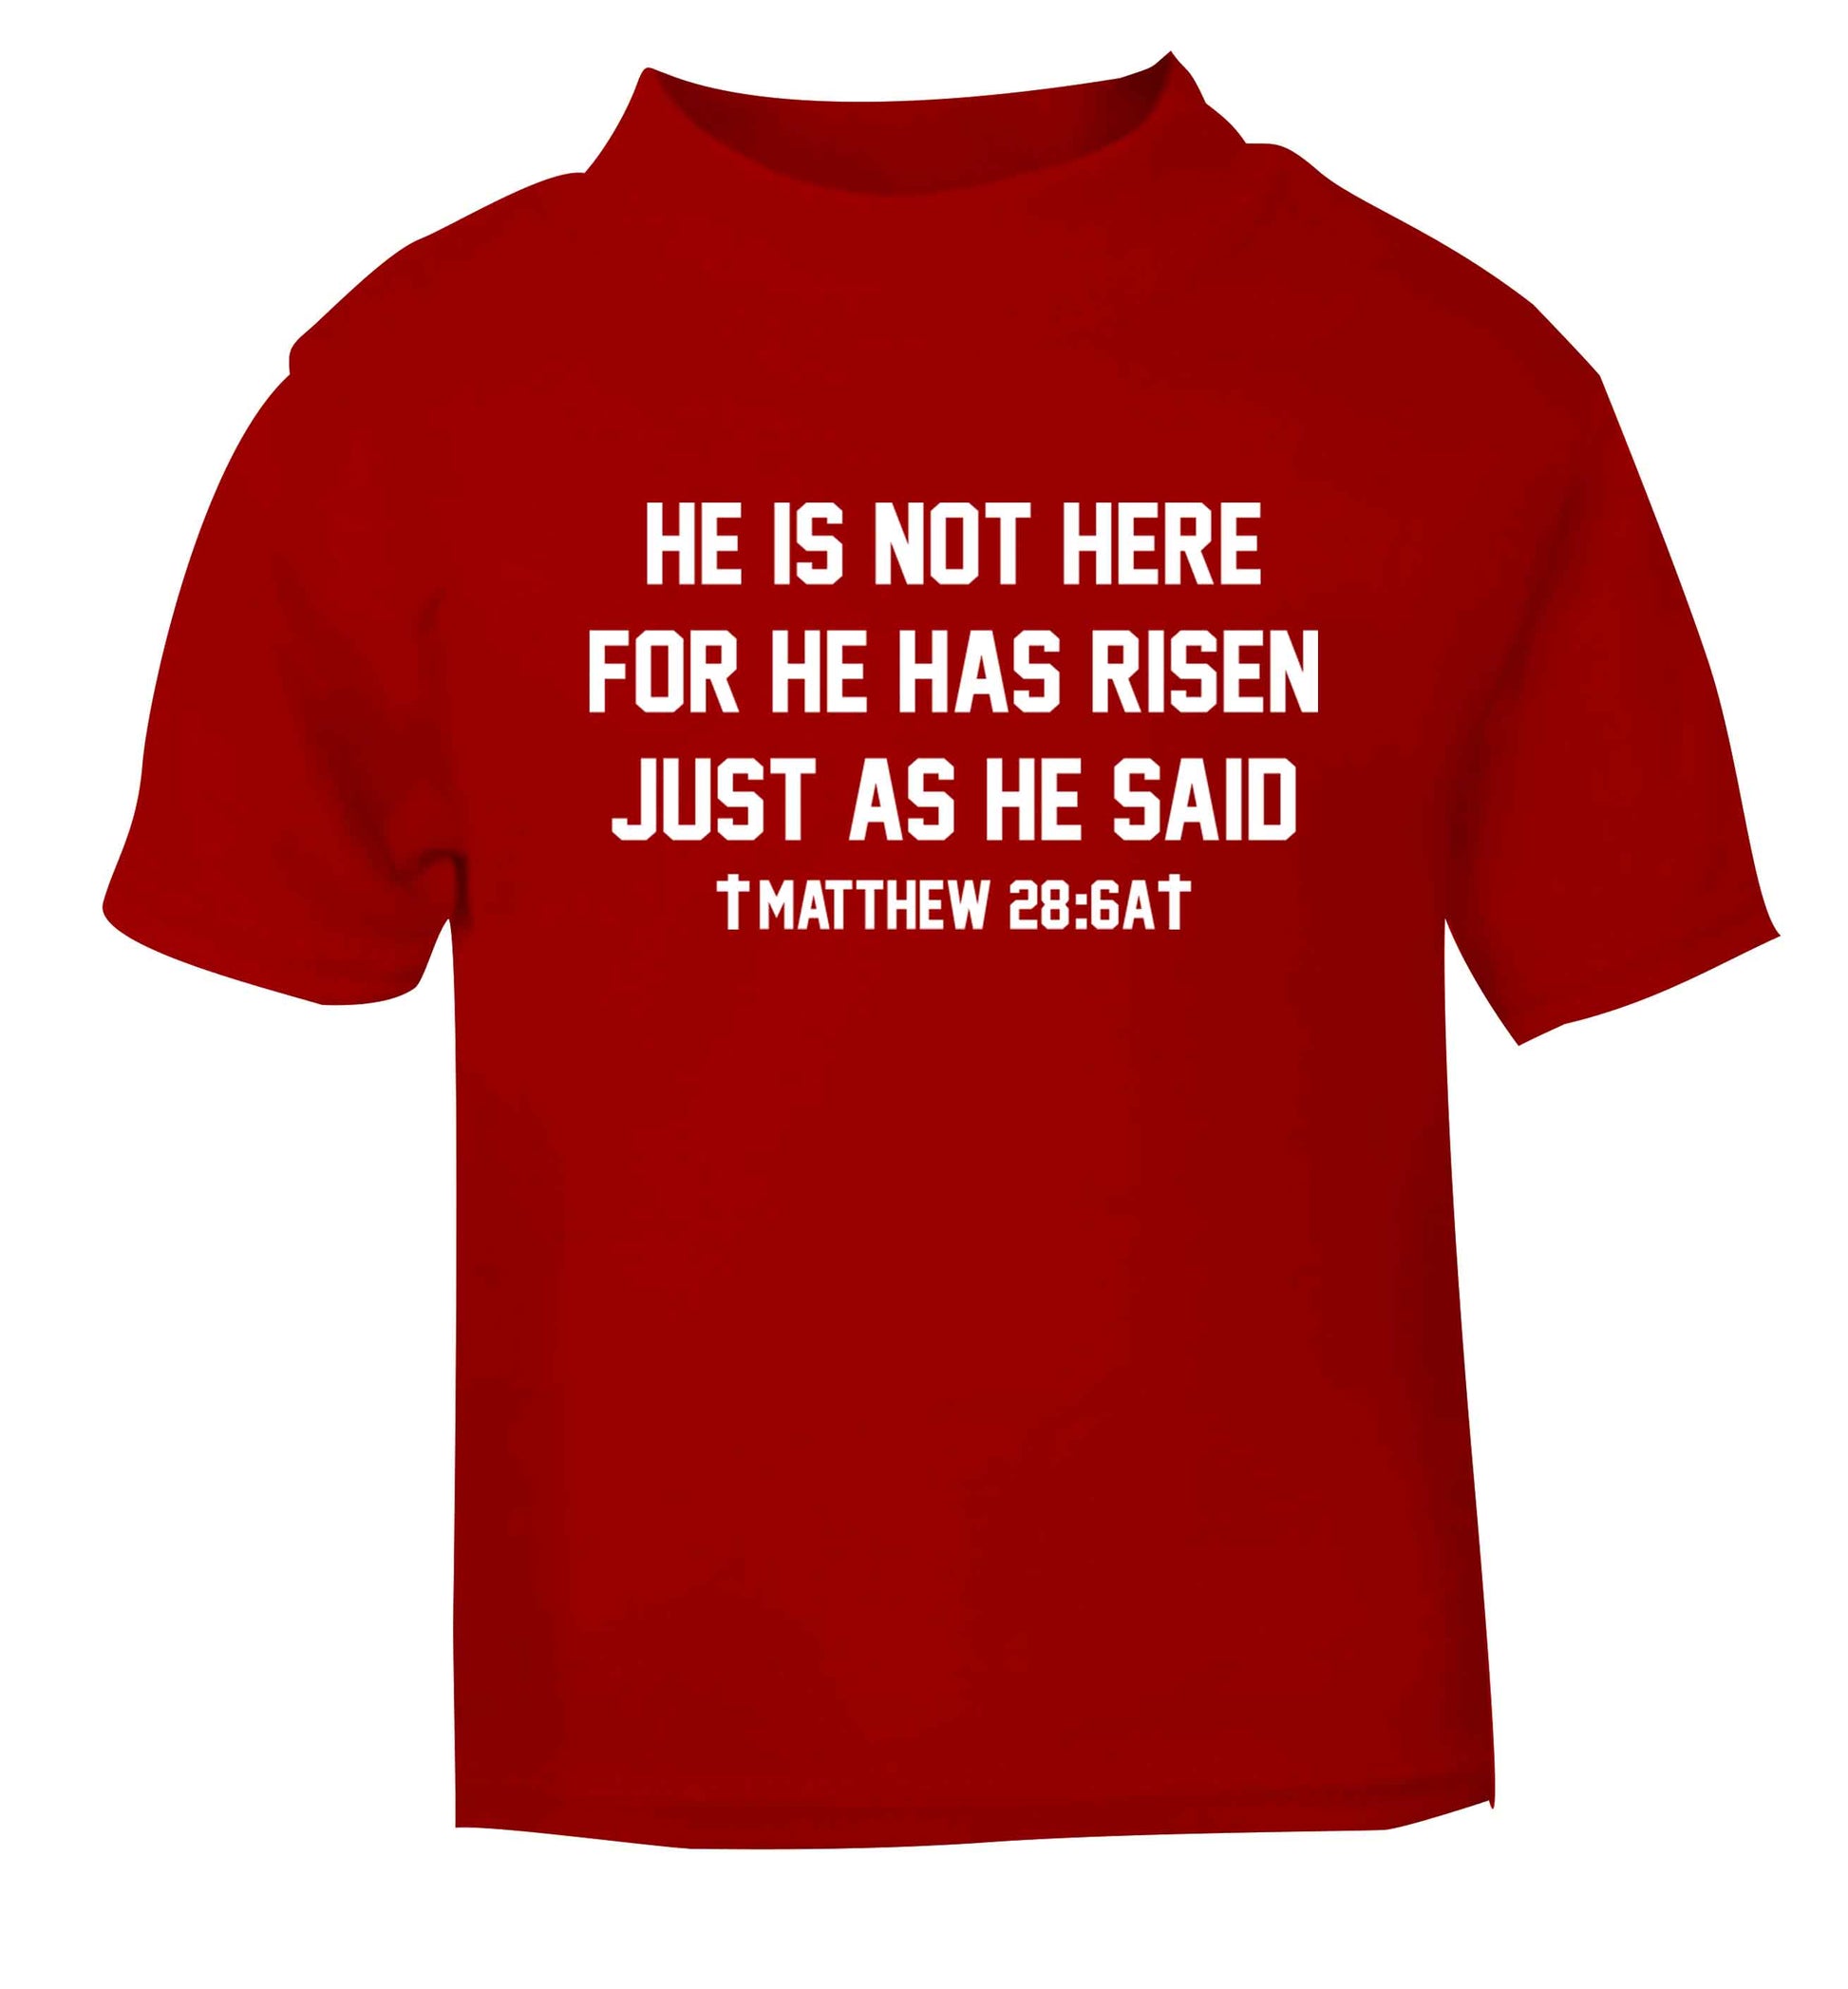 He is not here for he has risen just as he said matthew 28:6A red baby toddler Tshirt 2 Years